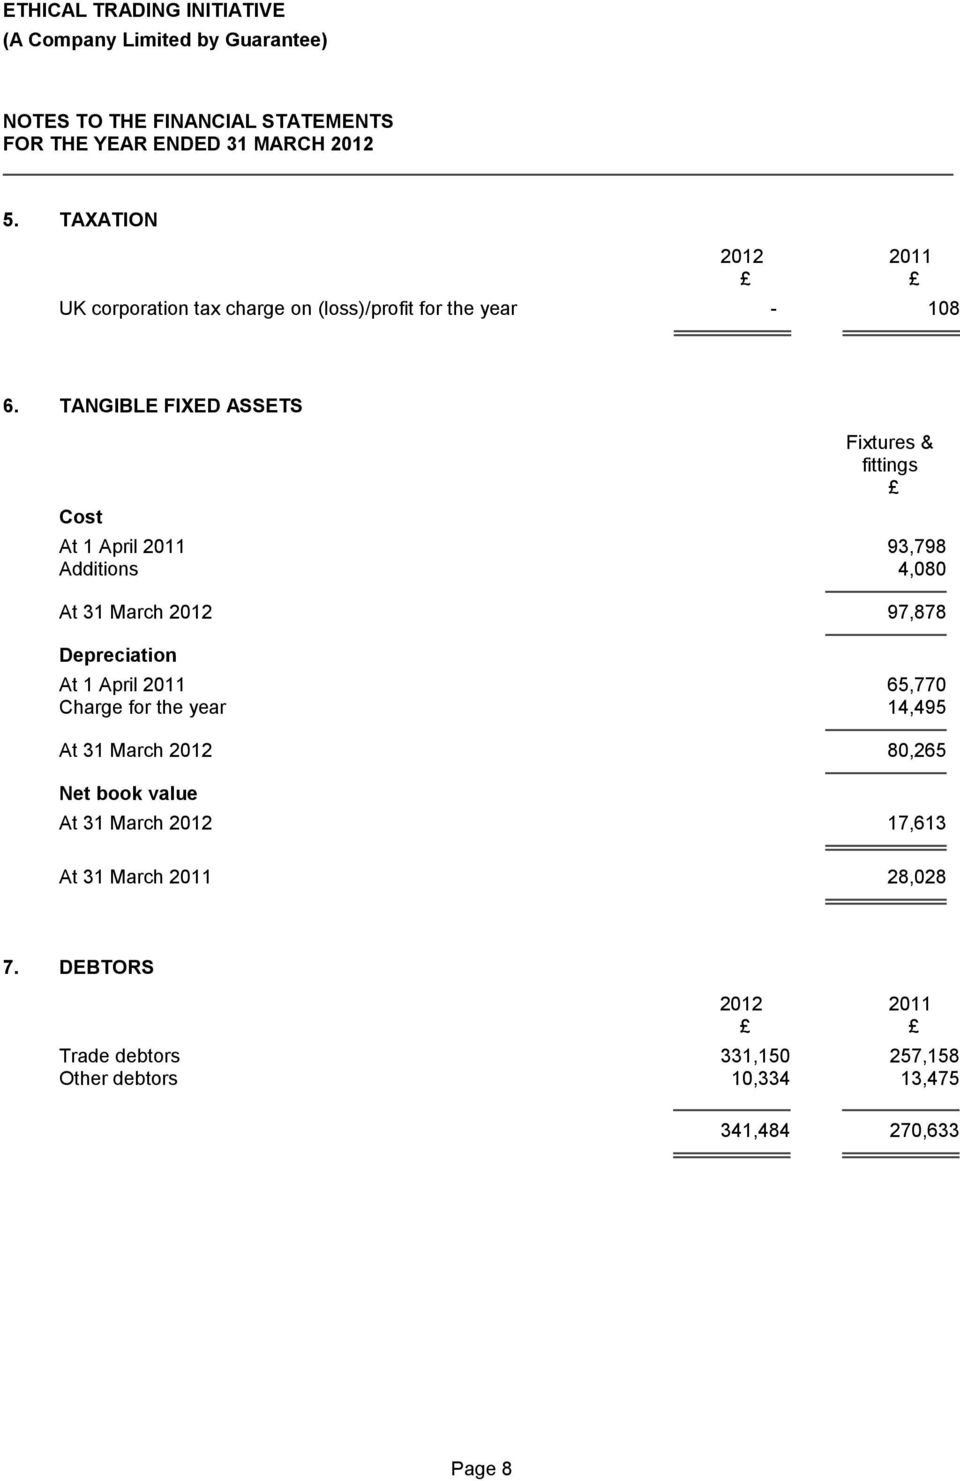 Depreciation At 1 April 2011 65,770 Charge for the year 14,495 At 31 March 2012 80,265 Net book value At 31 March